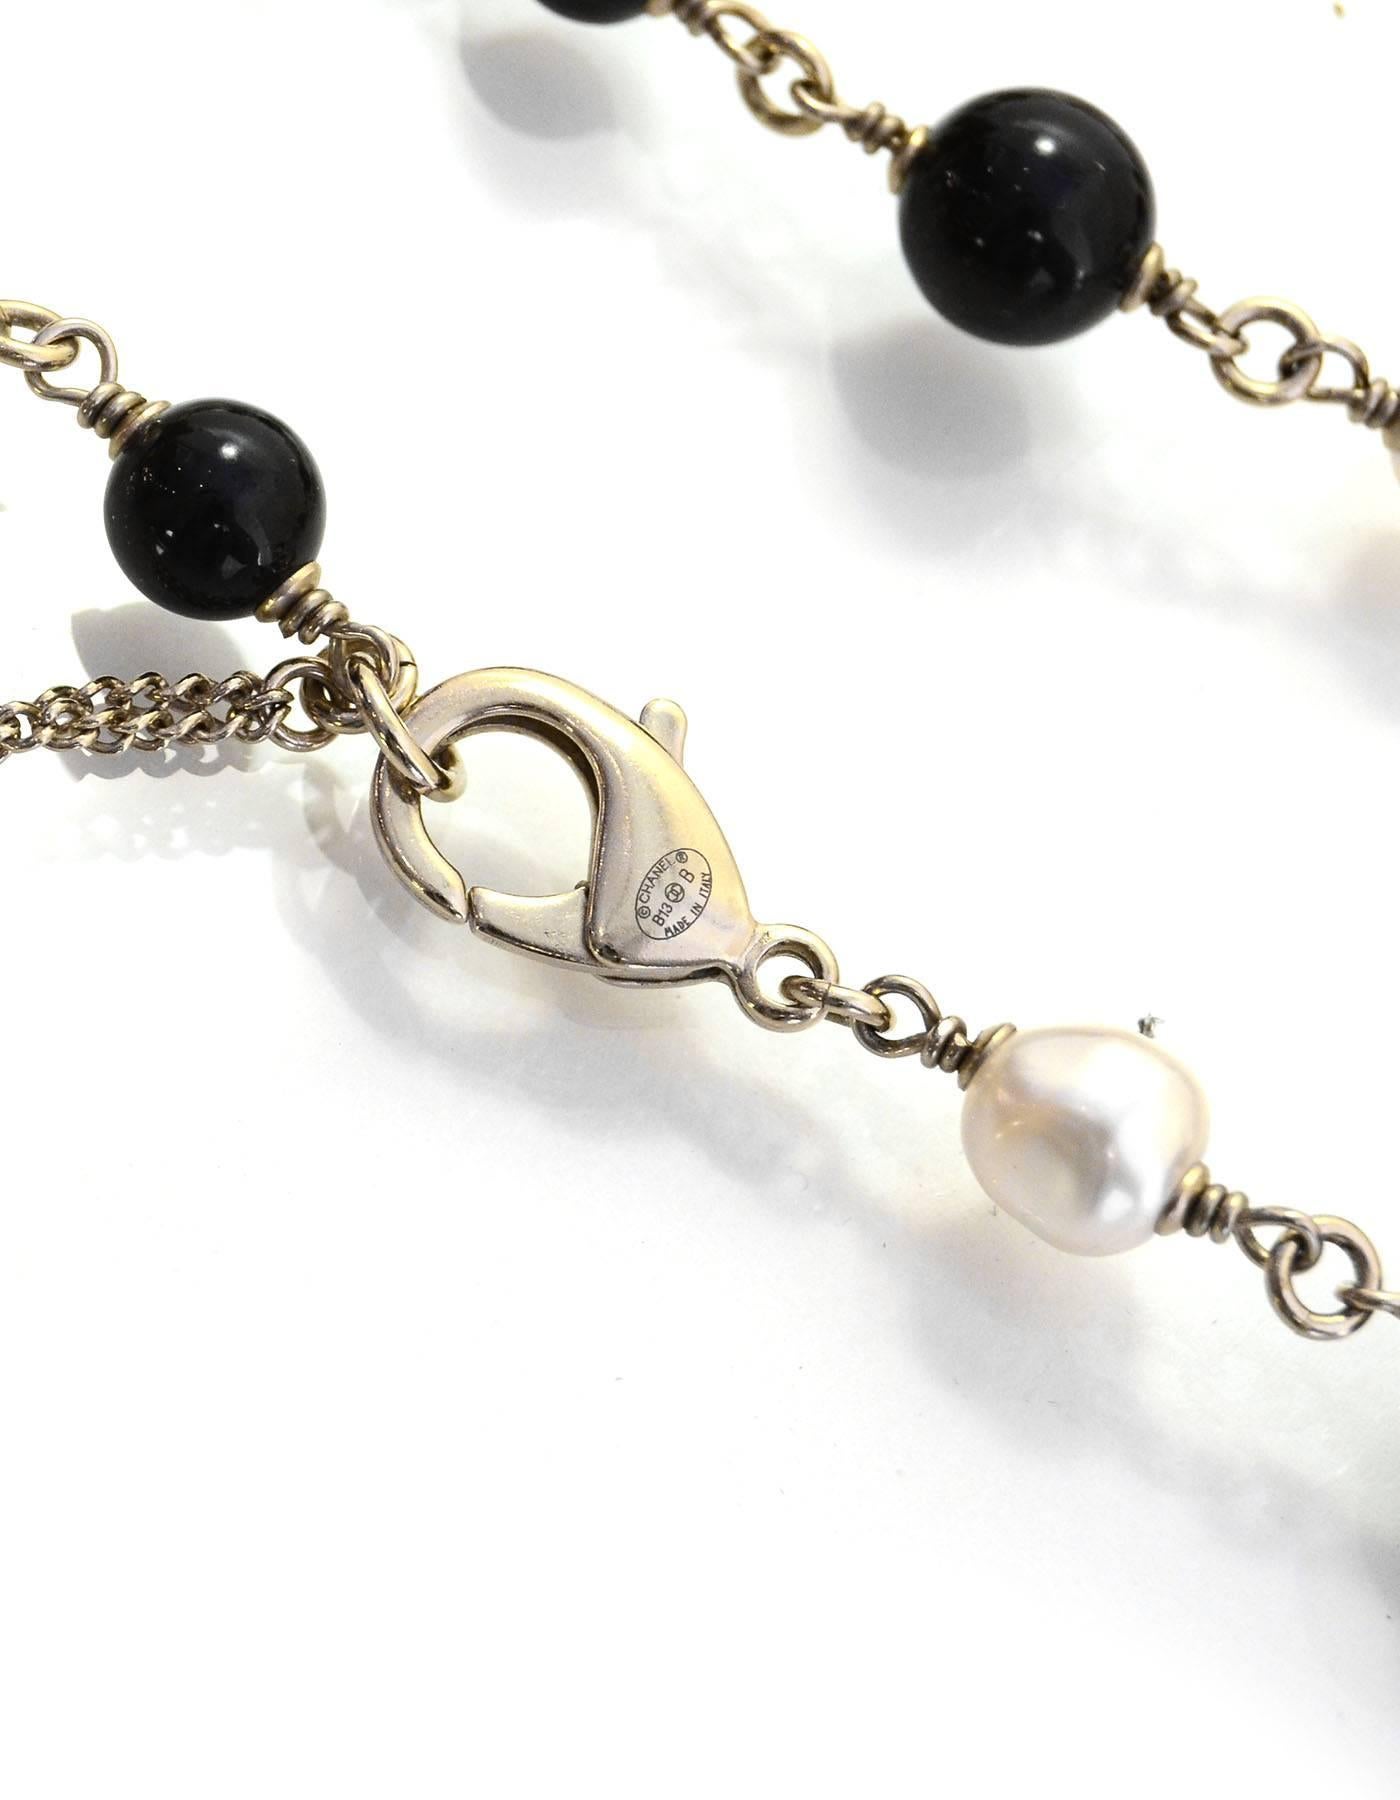 Chanel Black & Ivory Beaded CC Necklace
Features small and large black enamel CC pendants

Made In: Italy
Year of Production: 2013
Color: Black, Ivory and pale goldtone
Hardware: Goldtone
Materials: Metal, faux pearl, and beads
Closure: Lobster claw